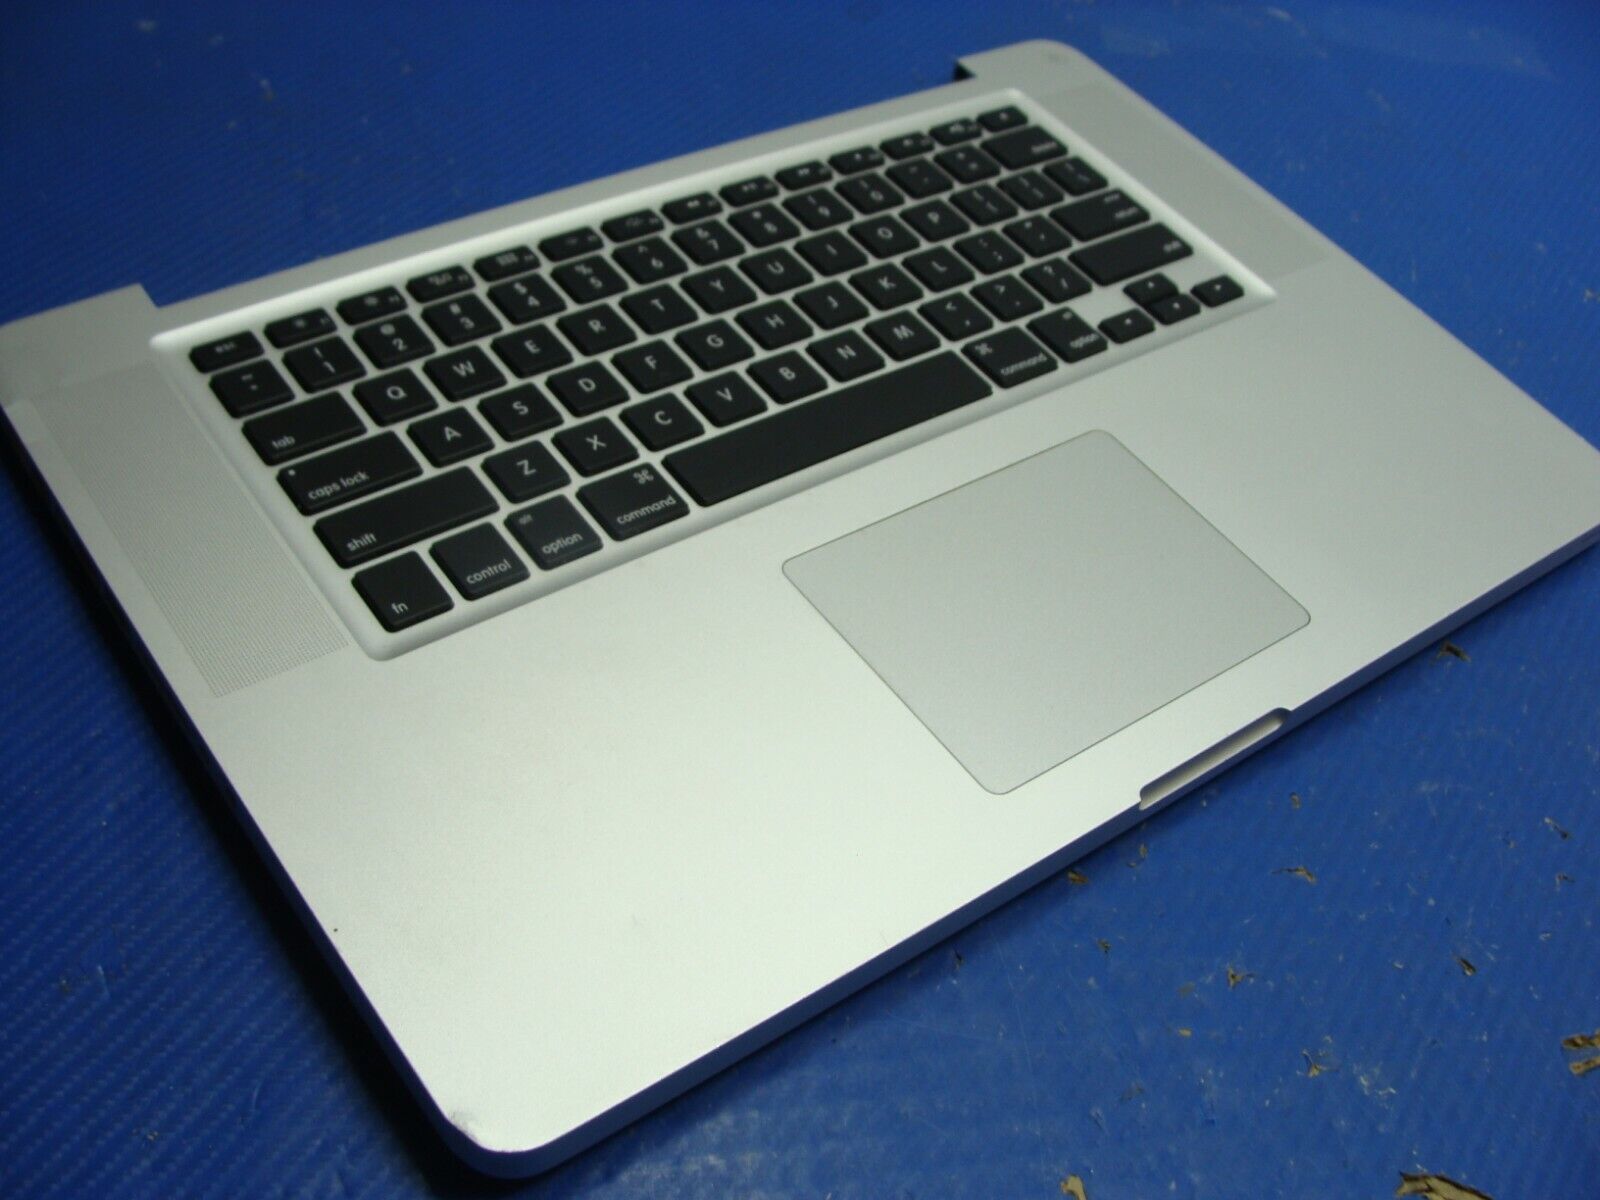 MacBook Pro A1286 15 Late 2011 MD318LL/A Top Case w/Keyboard Trackpad 661-6076